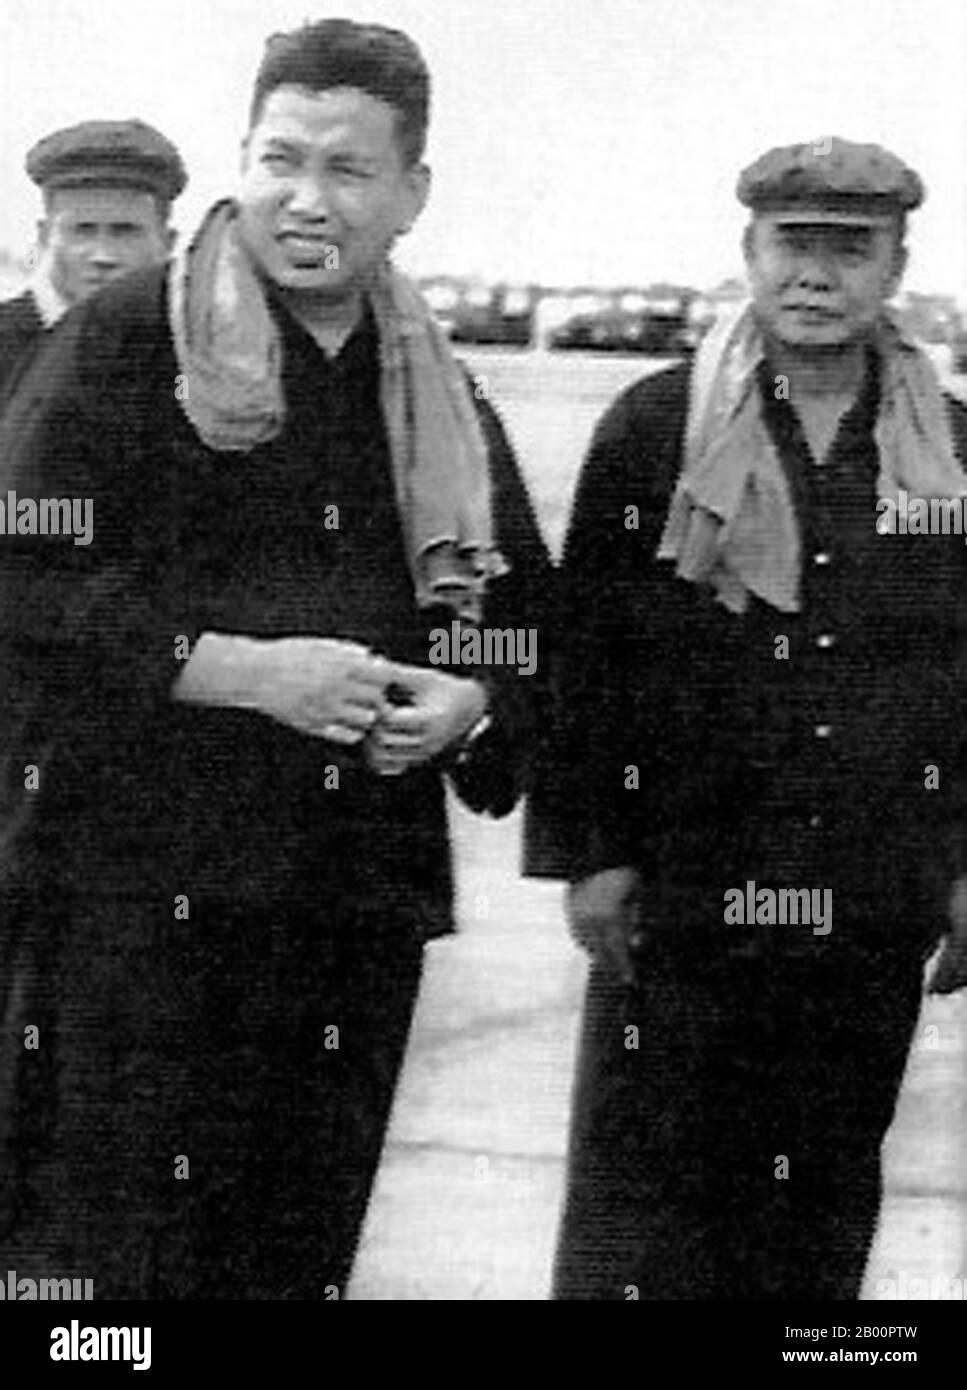 Cambodia: Khmer Rouge leader Pol Pot with Khmer Rouge East Zone commander So Phim.  So Phim (1925? - June 3, 1978) also called Sao Phim Pheum or Sao, aka So Vanna, was Khmer Rouge military commander of the eastern part of Democratic Kampuchea. In 1978, after troops from the eastern region were unable to resist an incursion by the Vietnamese, So Phim was accused of being an ally of Hanoi. A massive purge led by Ke Pauk was ordered in the eastern zone.  Encircled by the forces of Pol Pot, on 3 June 1978 So Phim committed suicide. His wife and children were captured and were all killed. Stock Photo